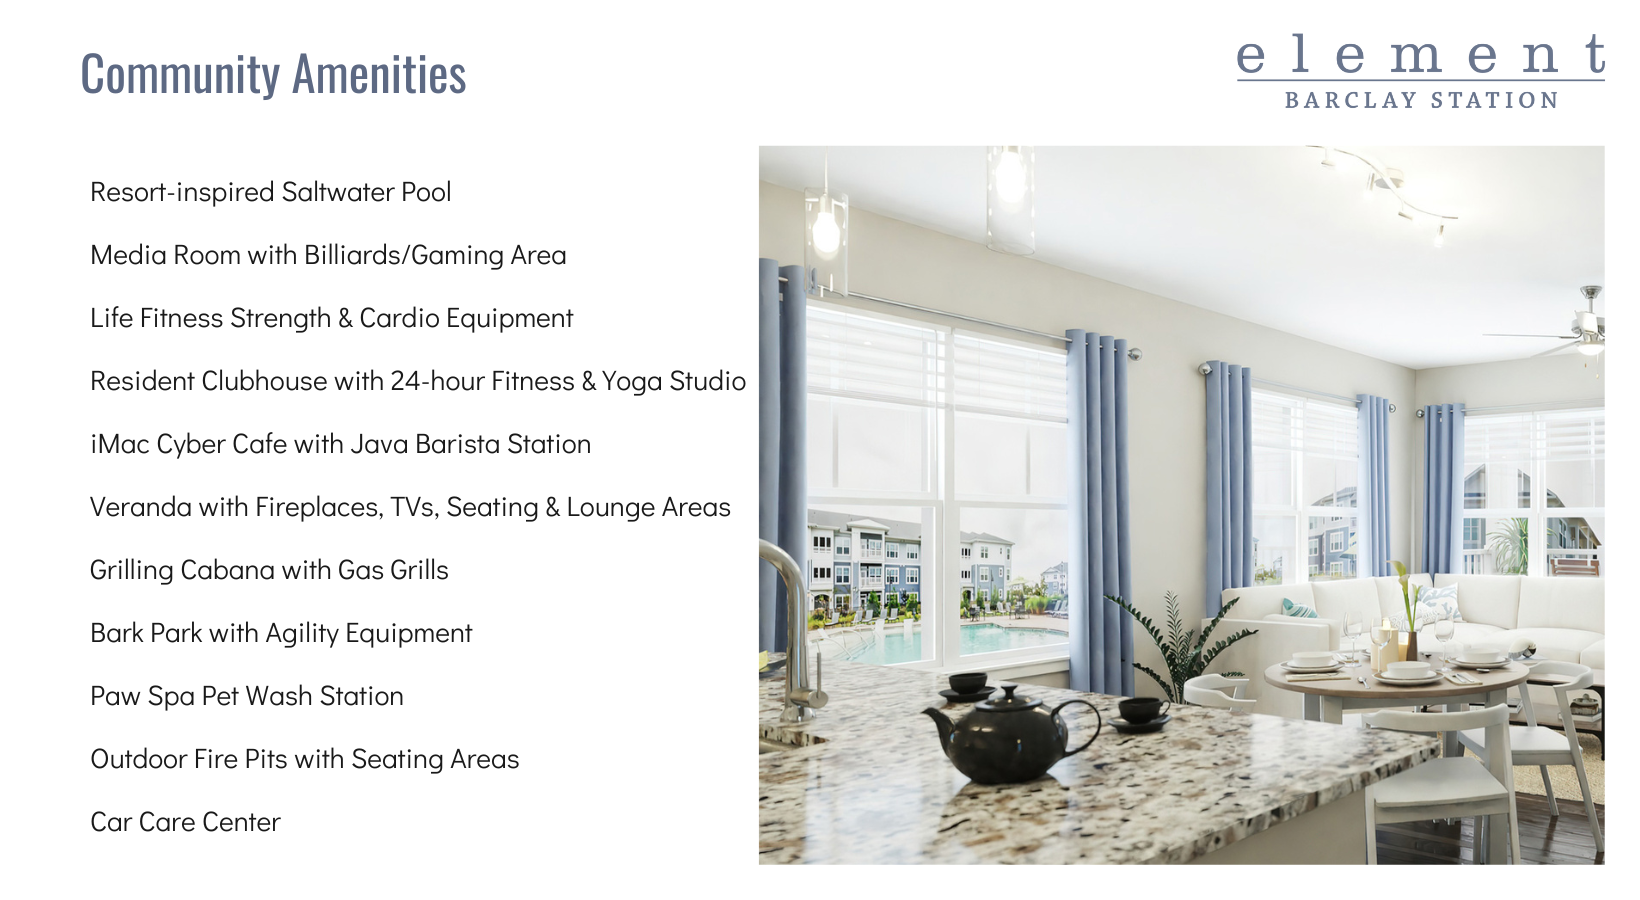 Community Amenity list with image of granite countertop looking out onto Swimming Pool